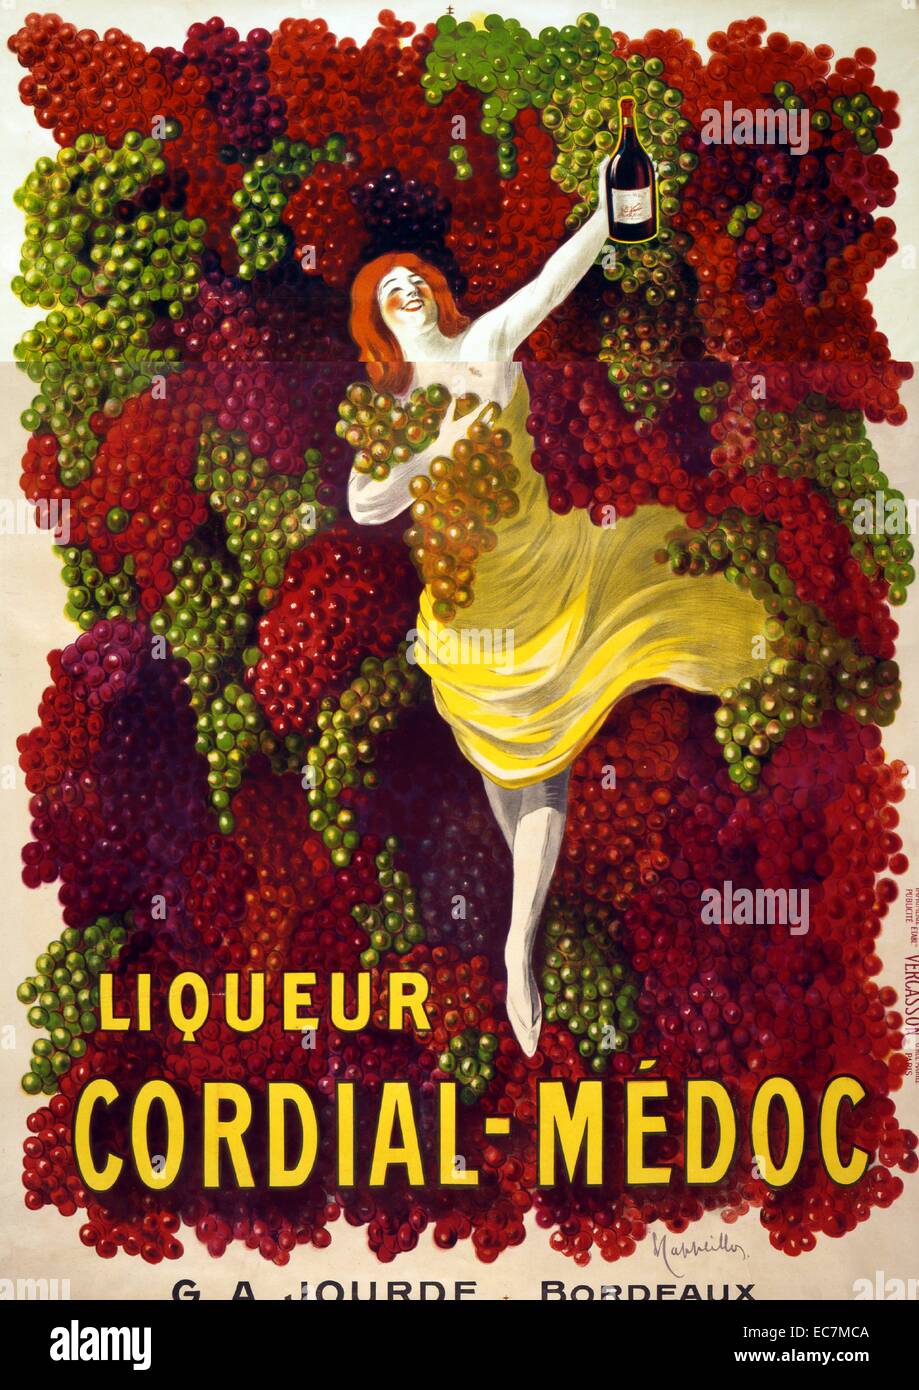 Poster advertising Liquor Cordial-Medoc by G. A. Jourde - Bordeaux. Shows a woman holding a bottle and grapes, against a background of grapes. Stock Photo